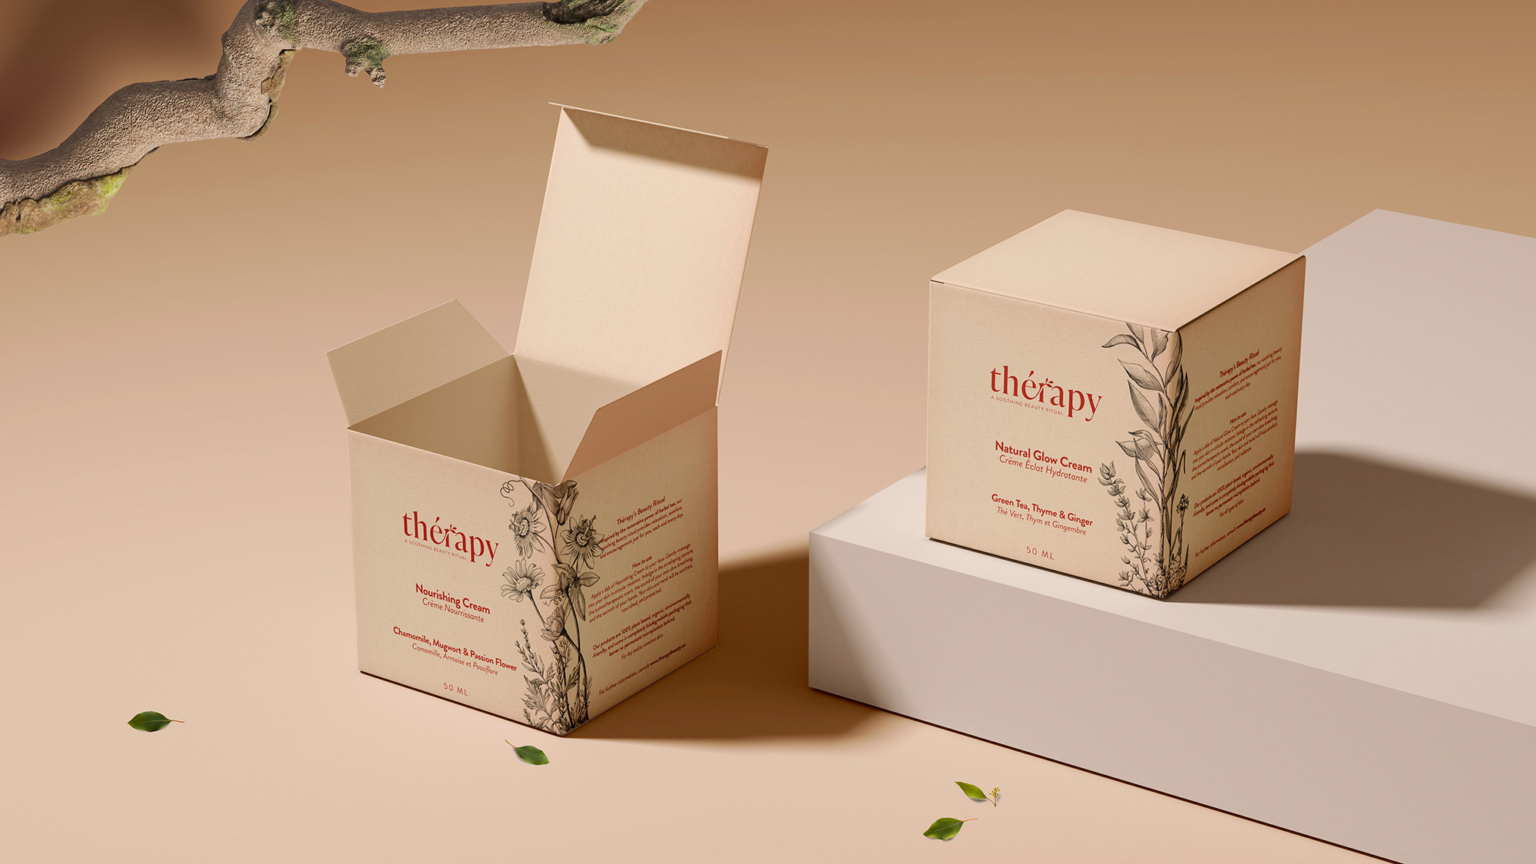 Packaging for Thérapy brand